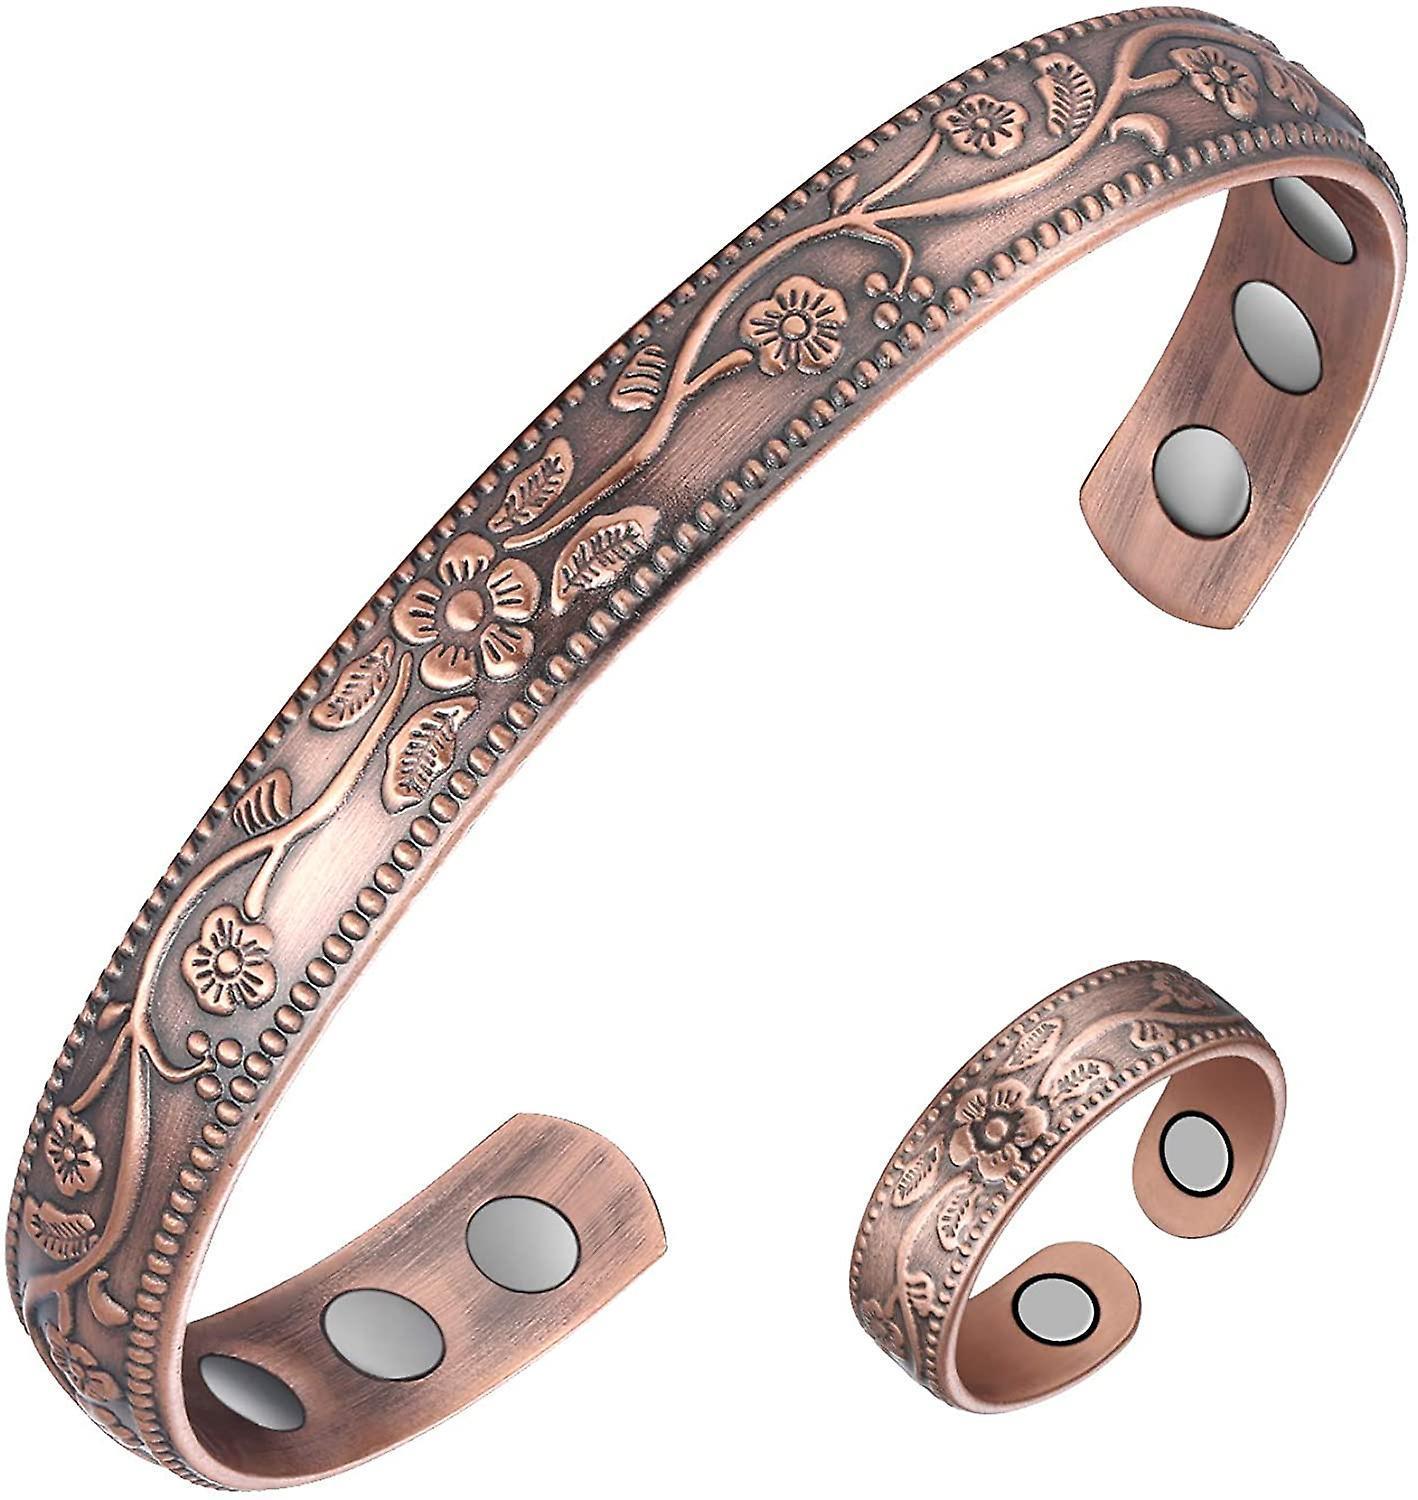 Copper Magnetic Bracelet And Ring For Men Women~pain Relief For Arthritis&carpal Tunnel~magnetic Copper Bracelet With Strong Magnets&therapy Copper Ri